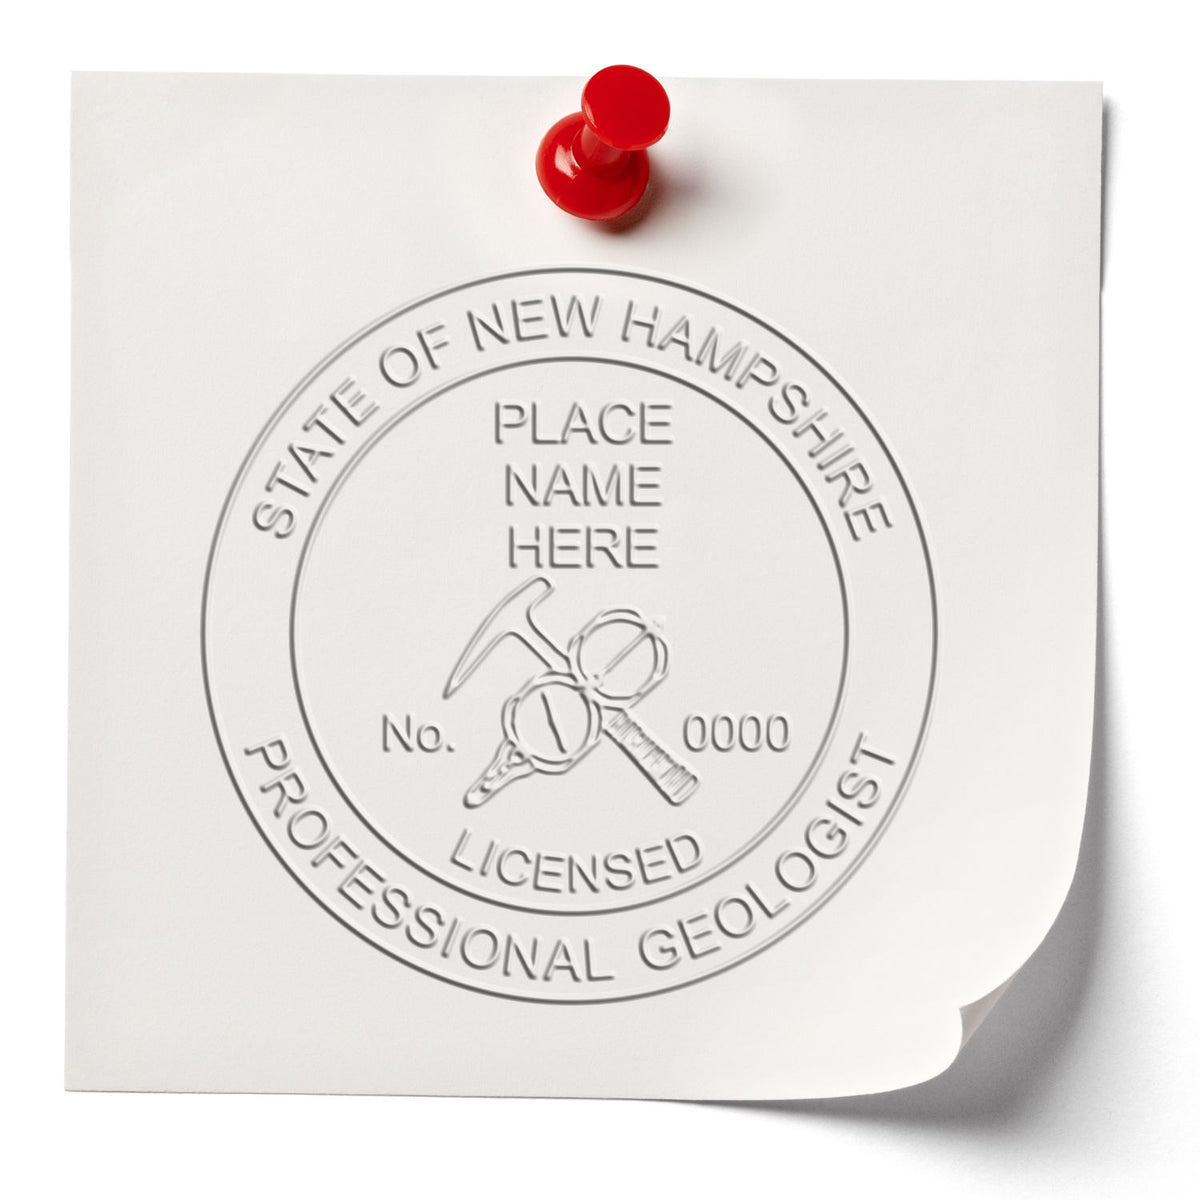 An in use photo of the Soft New Hampshire Professional Geologist Seal showing a sample imprint on a cardstock